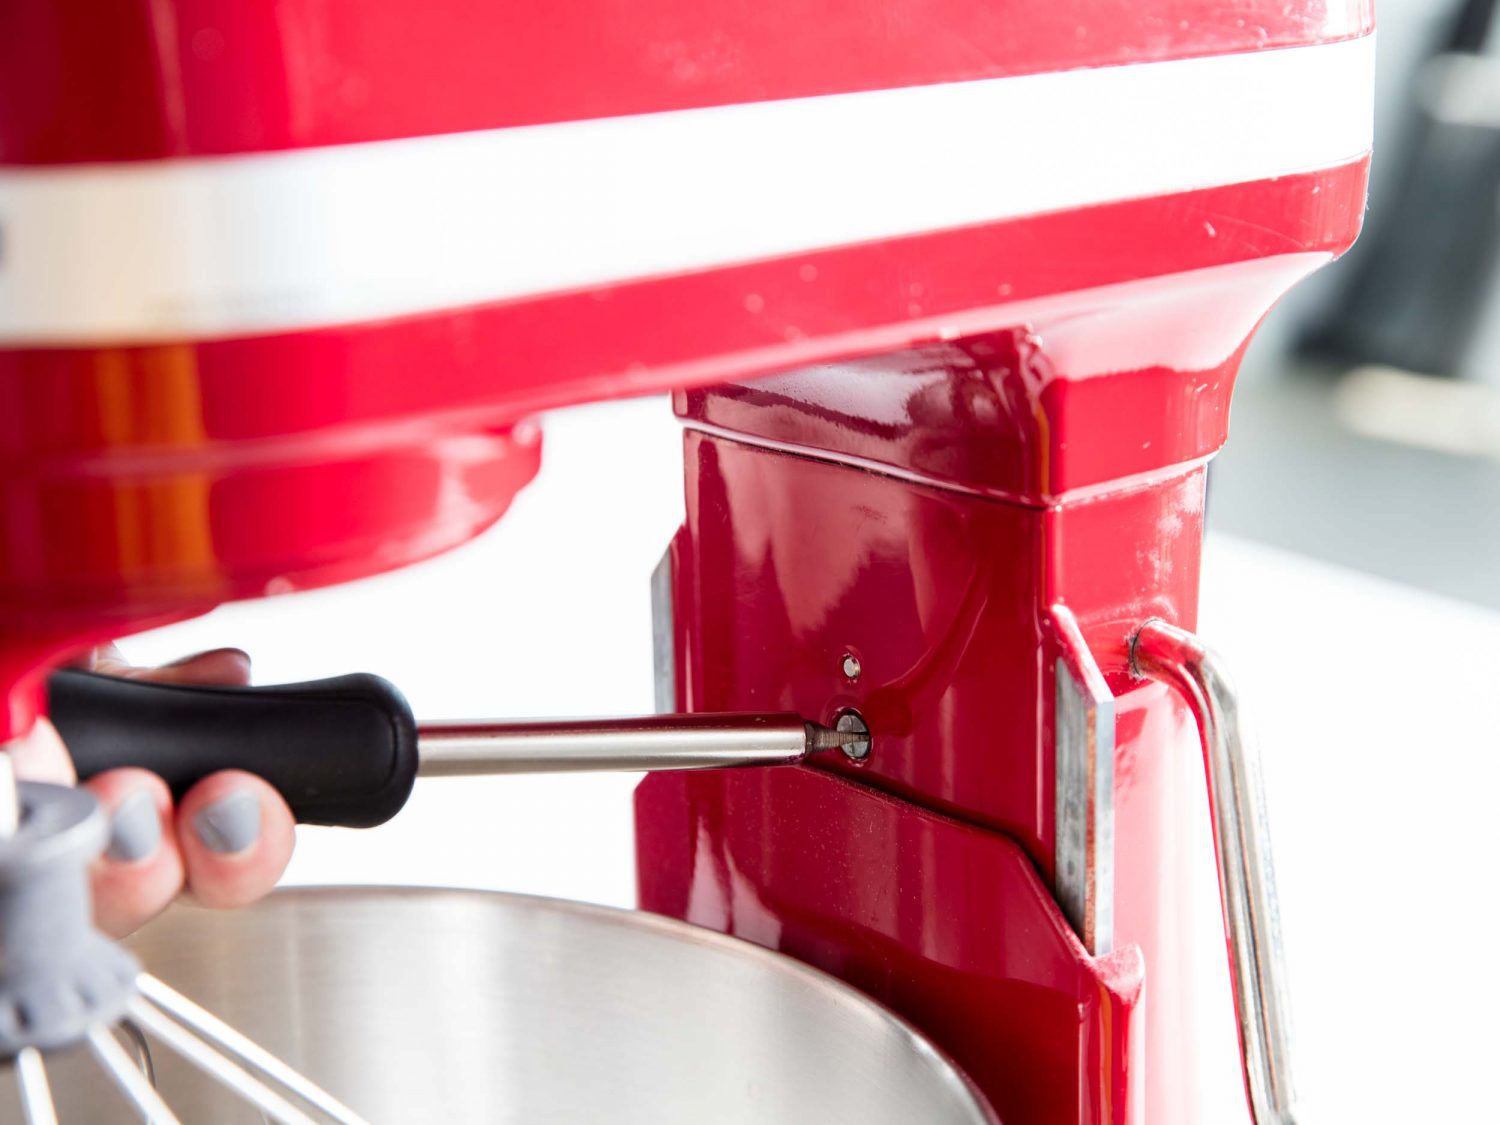 How To Adjust Stand Mixer Height